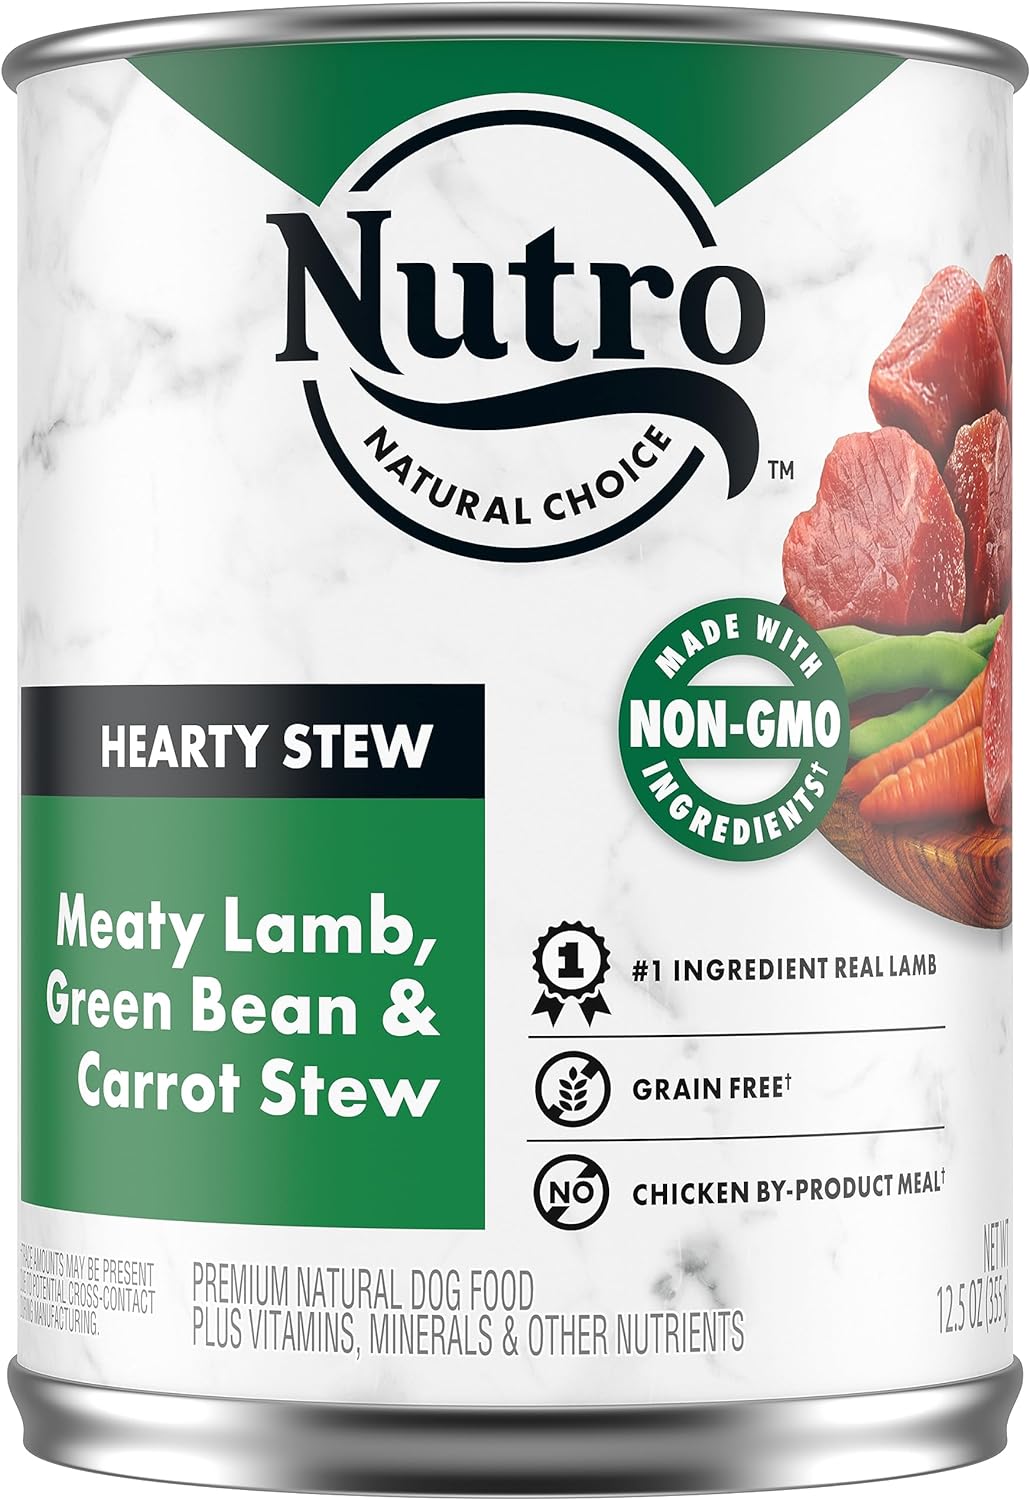 NUTRO HEARTY STEW Adult Natural Grain Free Wet Dog Food Cuts in Gravy Meaty Lamb, Green Bean & Carrot Stew, (12) 12.5 oz. Cans